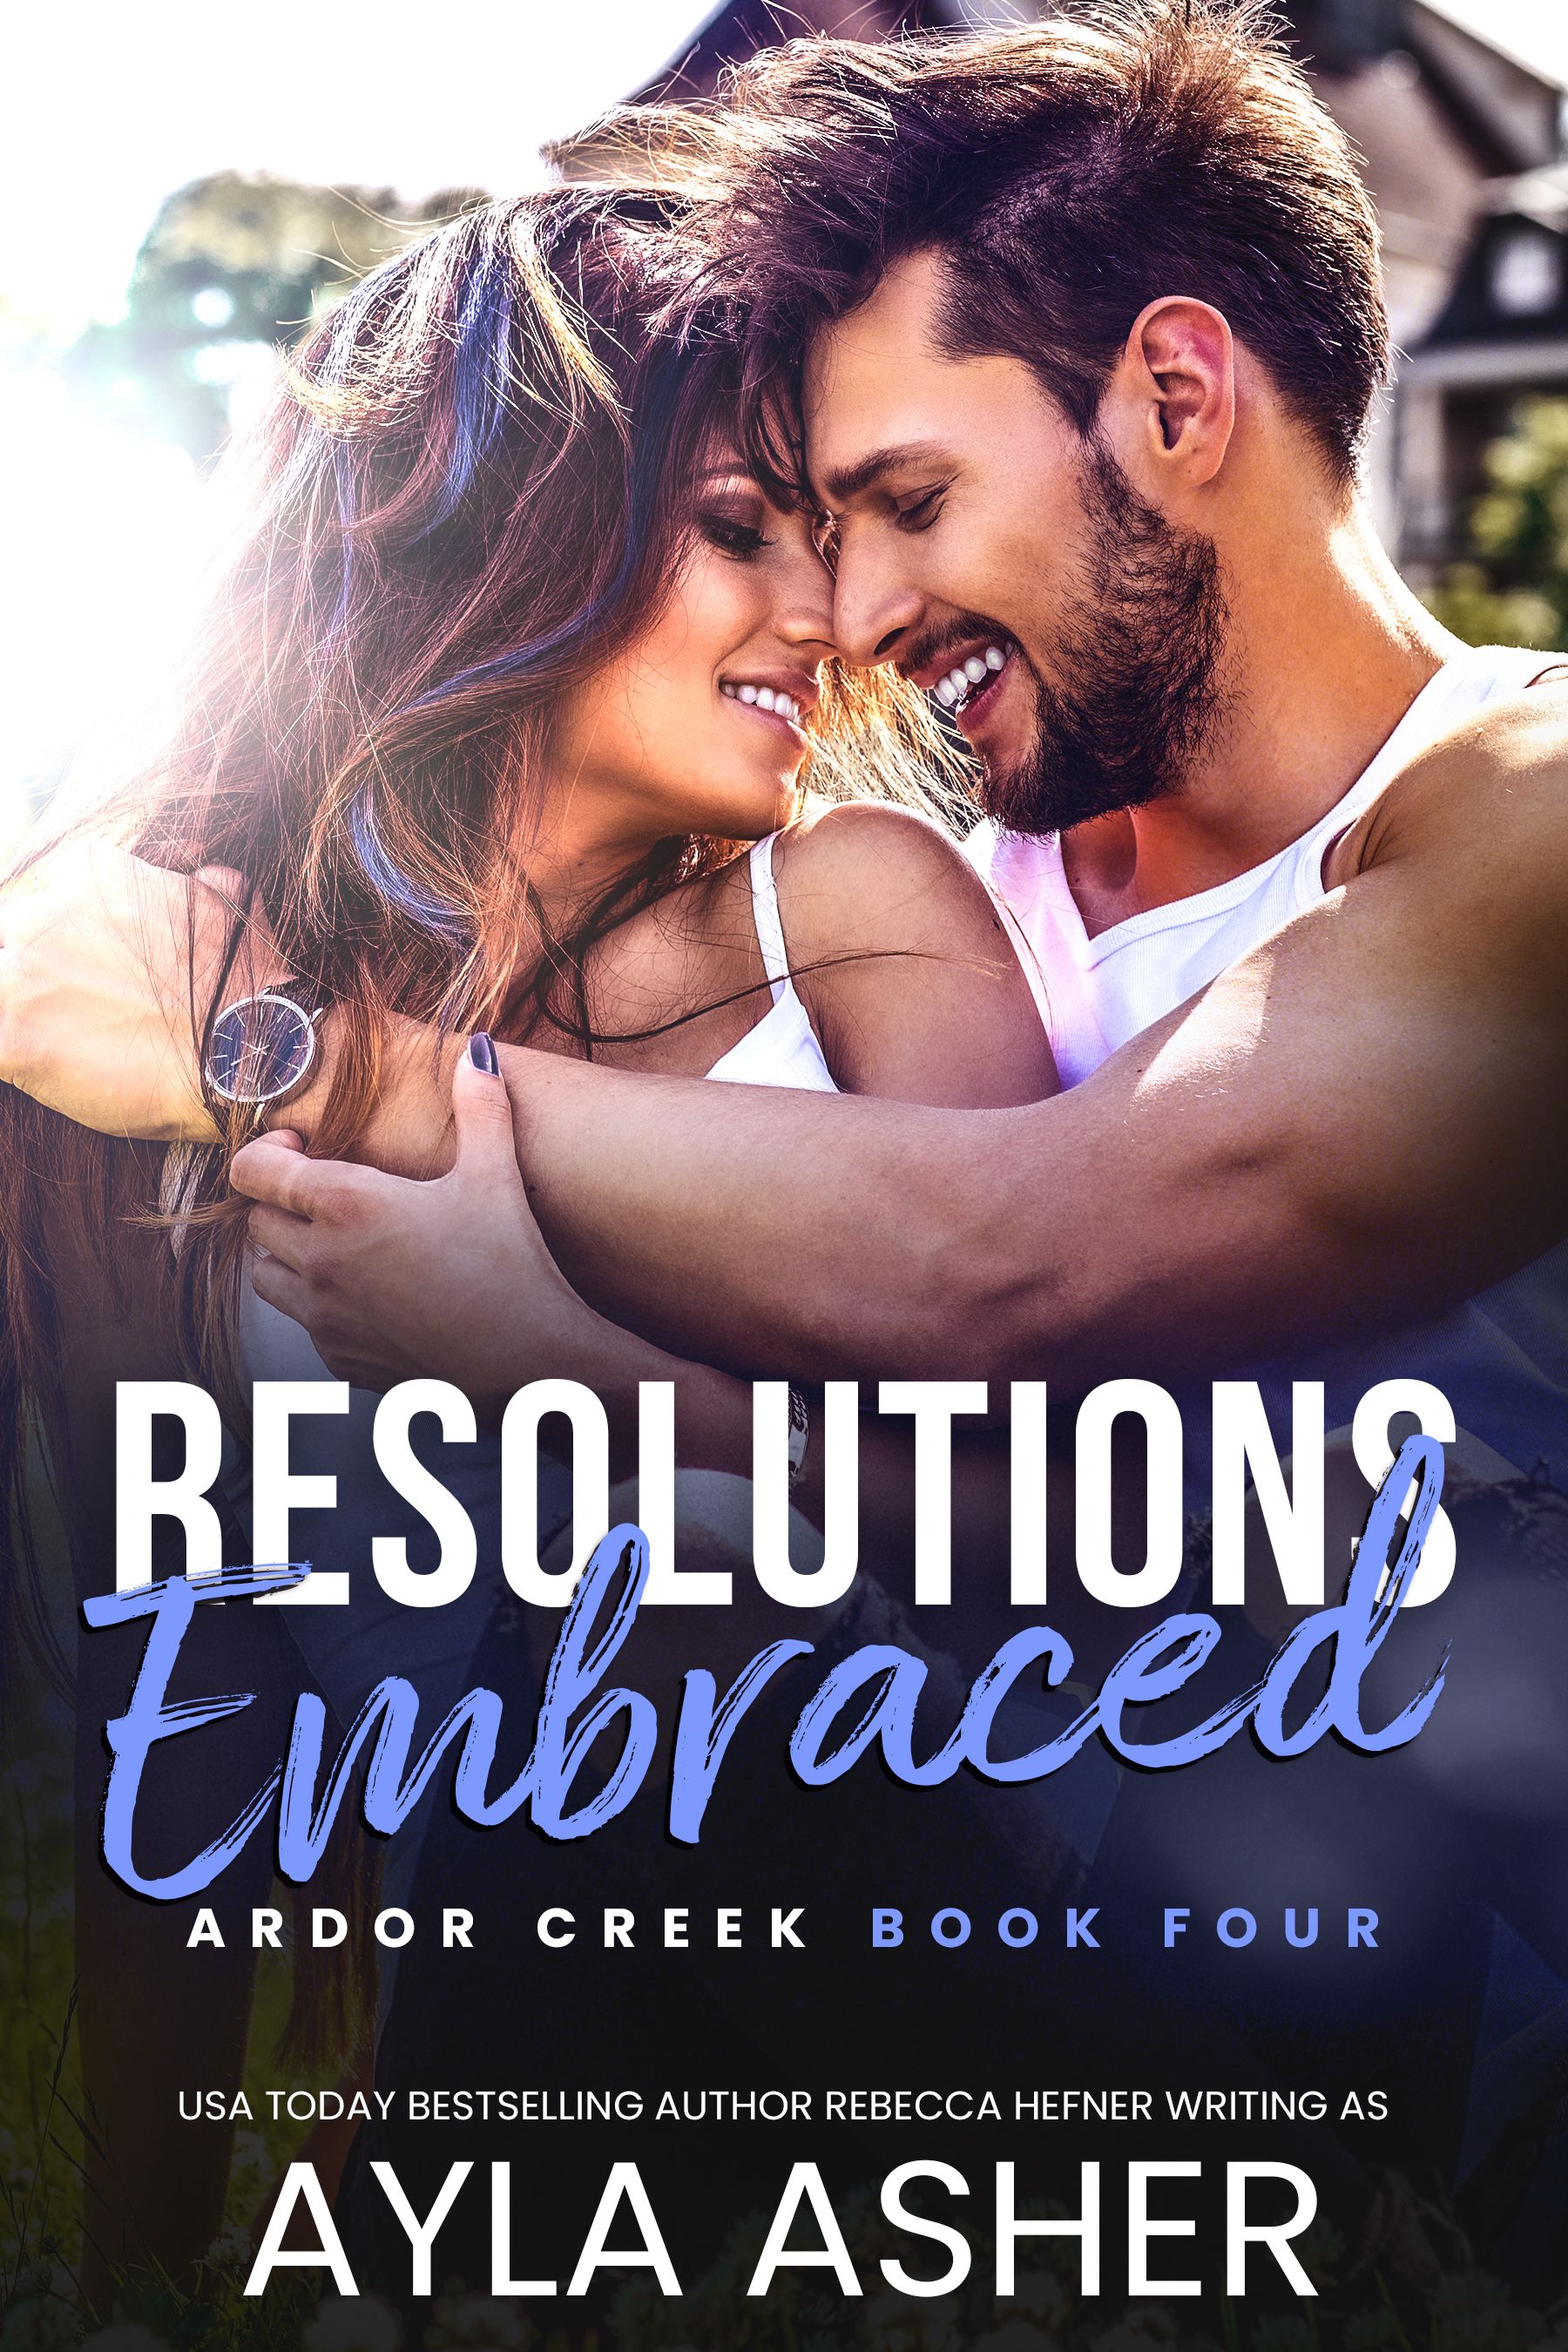 Resolutions Embraced - Steamy Small-Town Romance